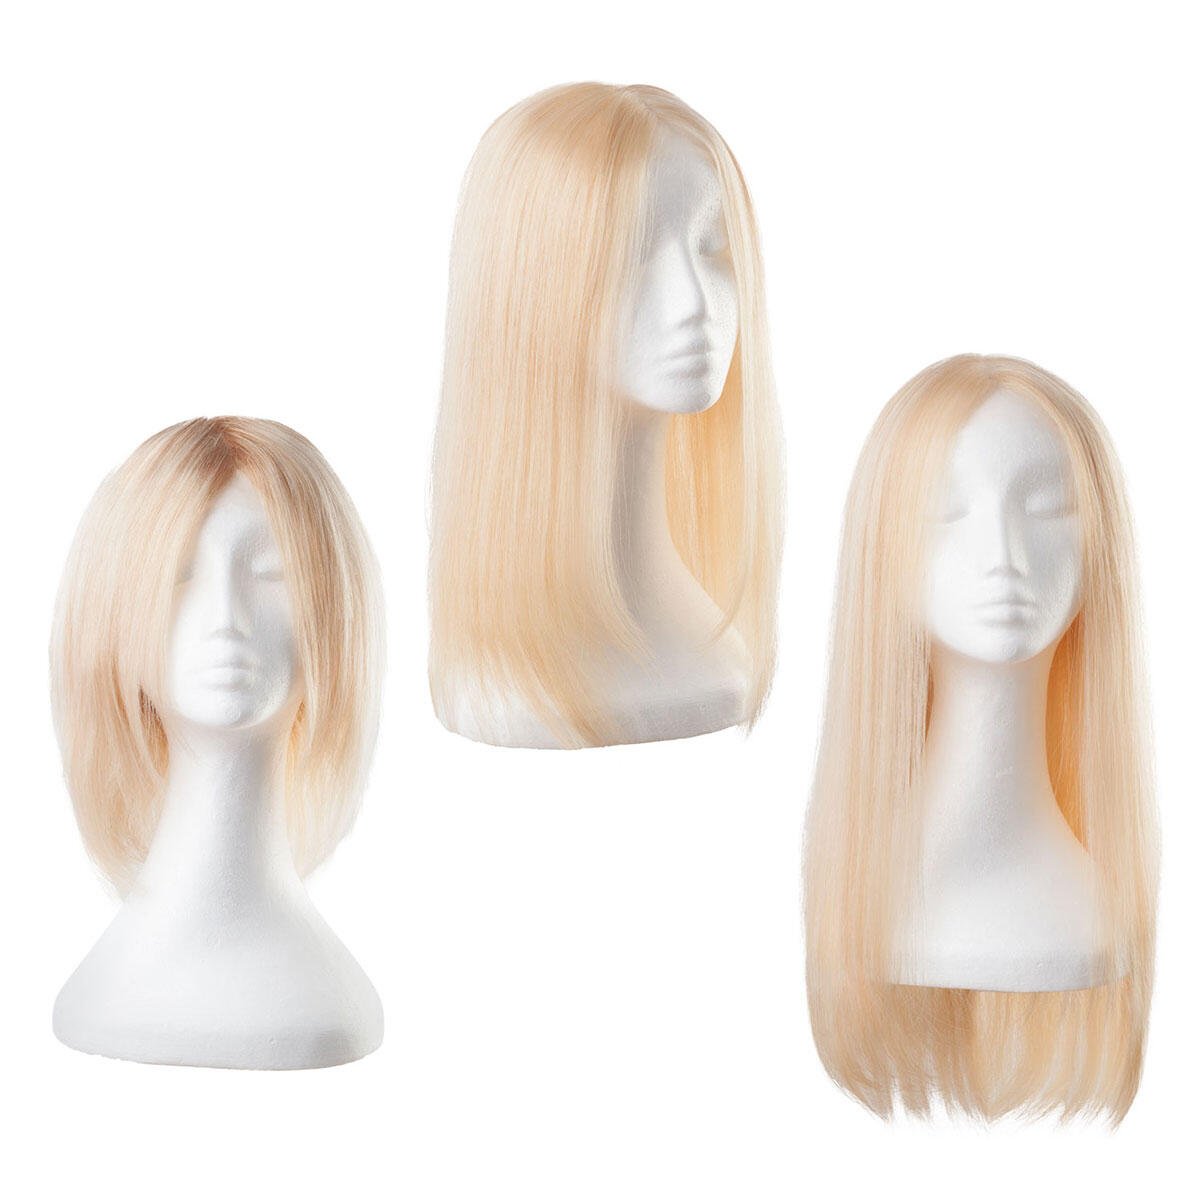 Lace Wig Human Hair 10.6 Blonde 55 cm